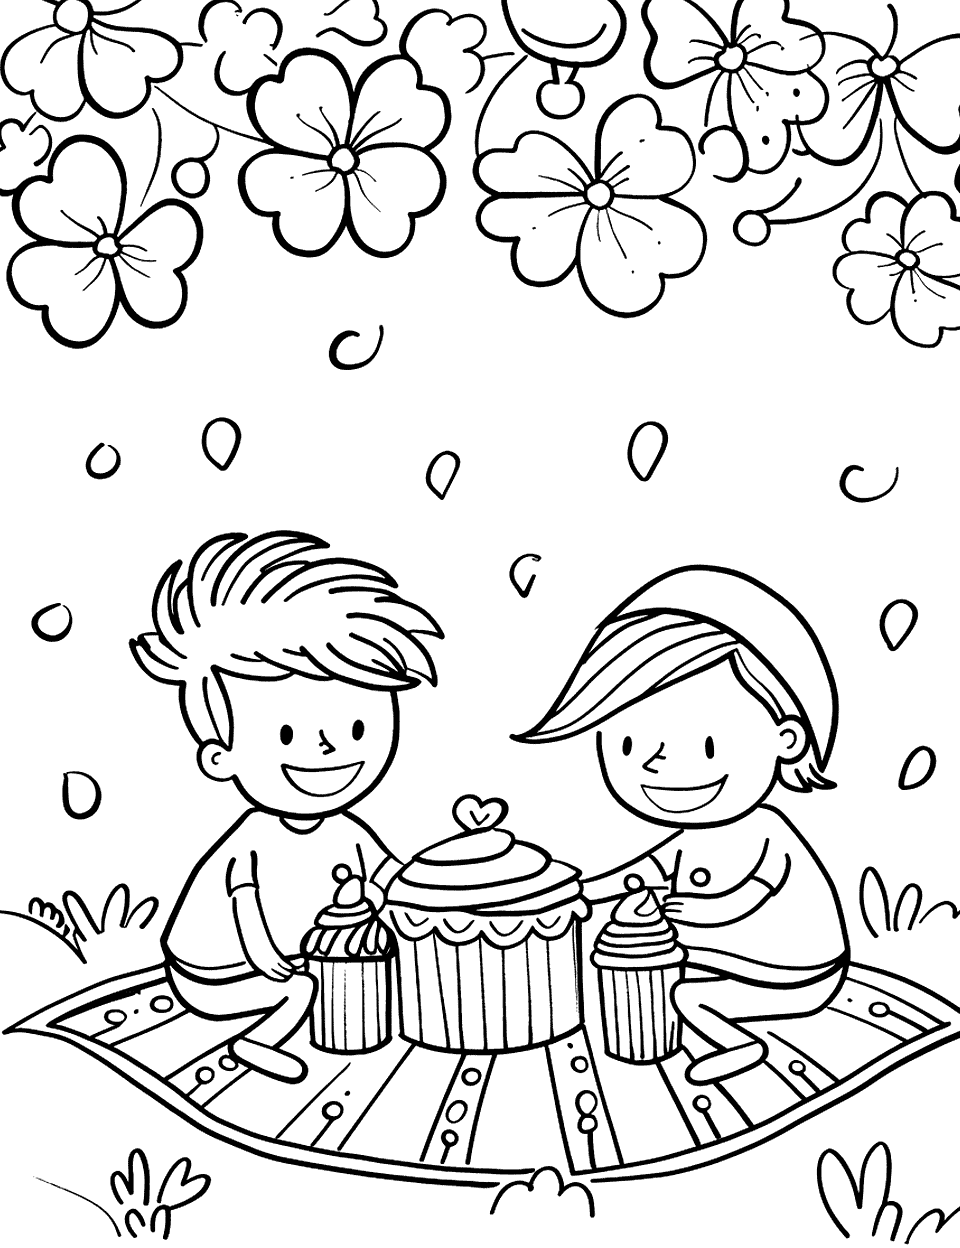 Picnic with Shamrock Coloring Page - A family enjoying a picnic under some shamrock near a forest.